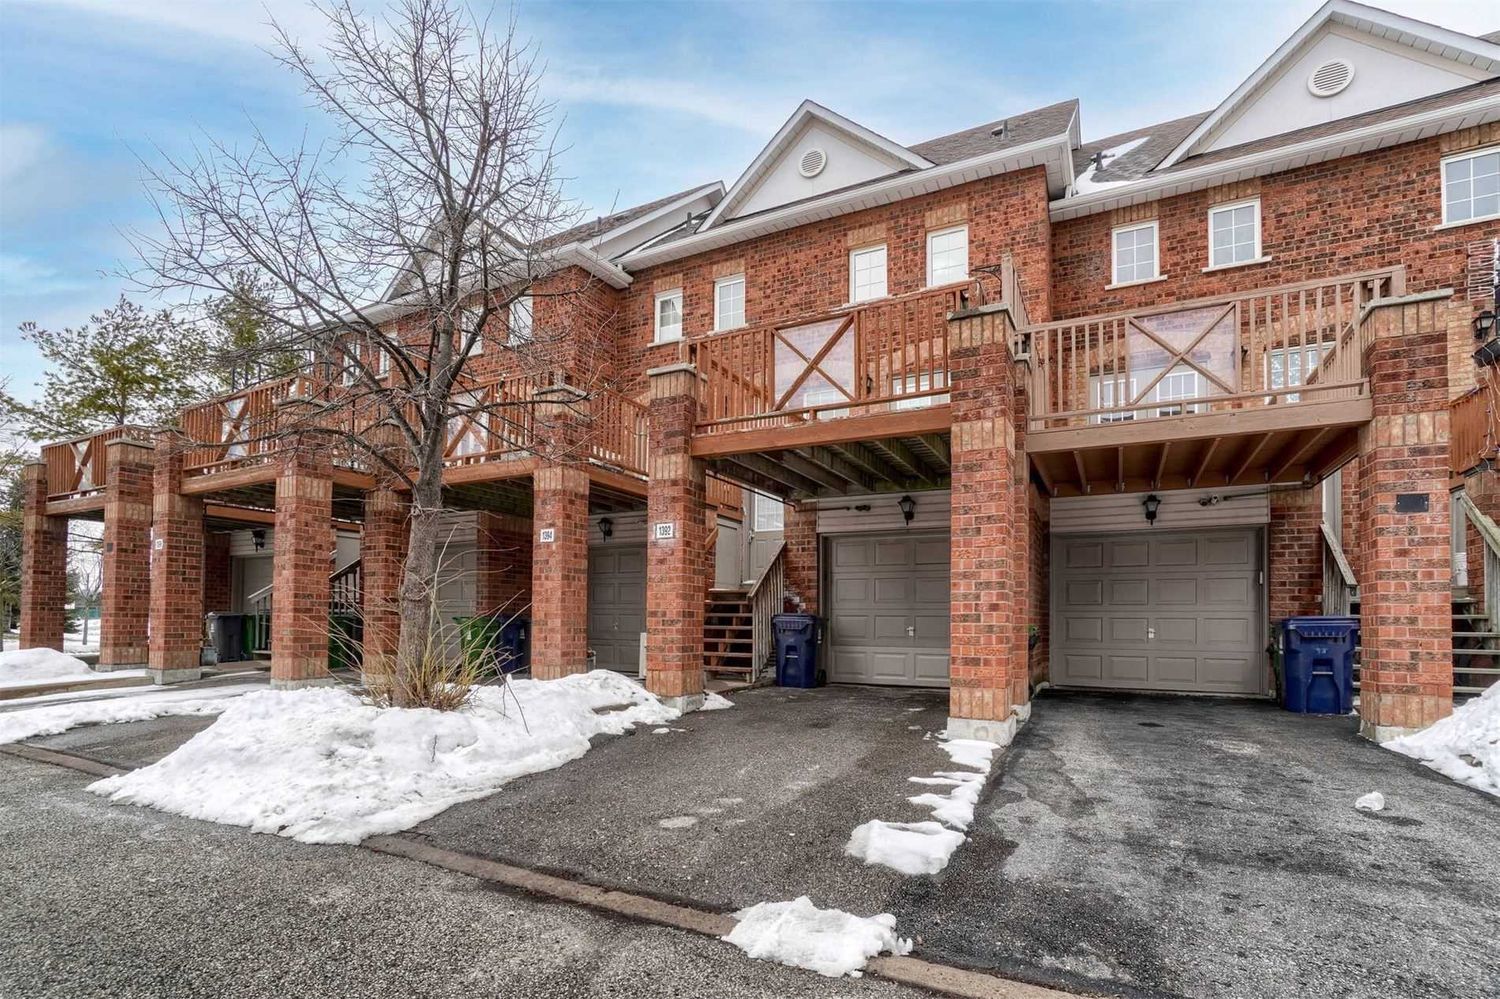 9420-9550 Sheppard Avenue E. Harmony North Townhomes is located in  Scarborough, Toronto - image #2 of 2